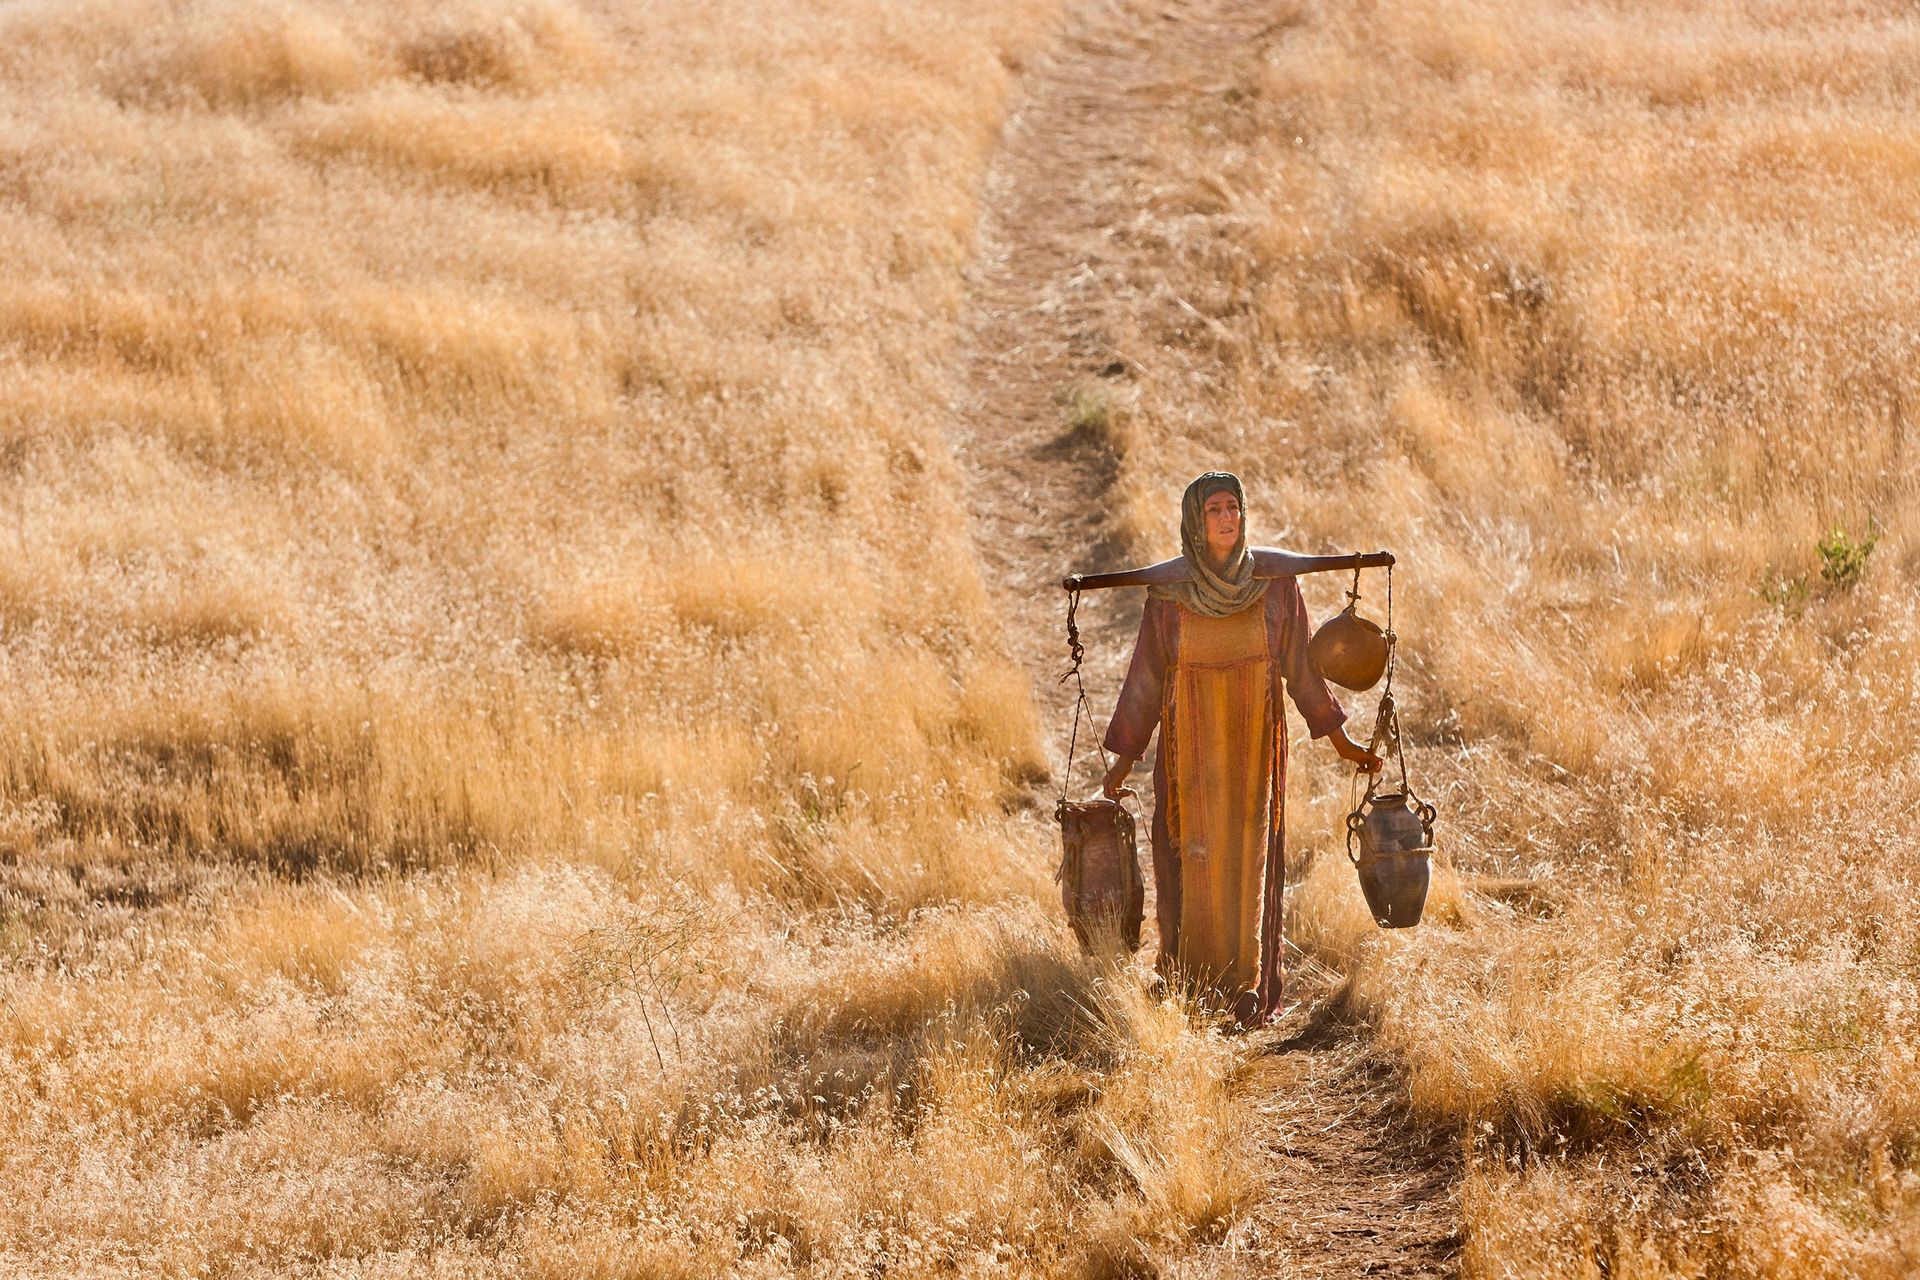 The Samaritan woman carries water from the well after learning from Jesus.